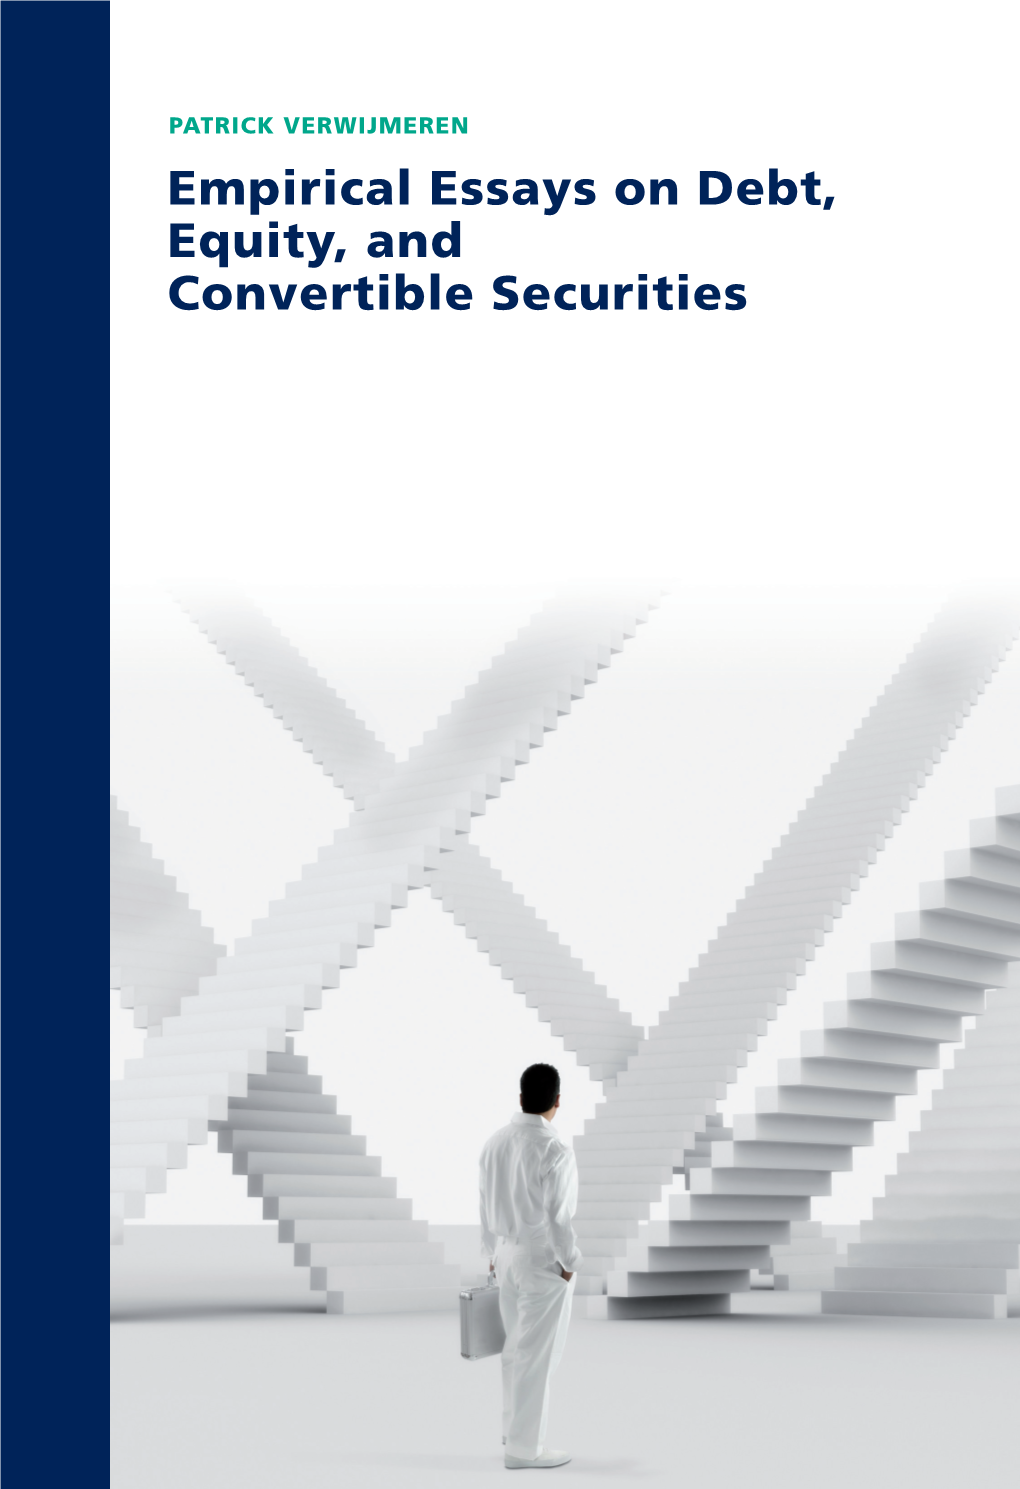 Empirical Essays on Debt, Equity, and Convertible Securities